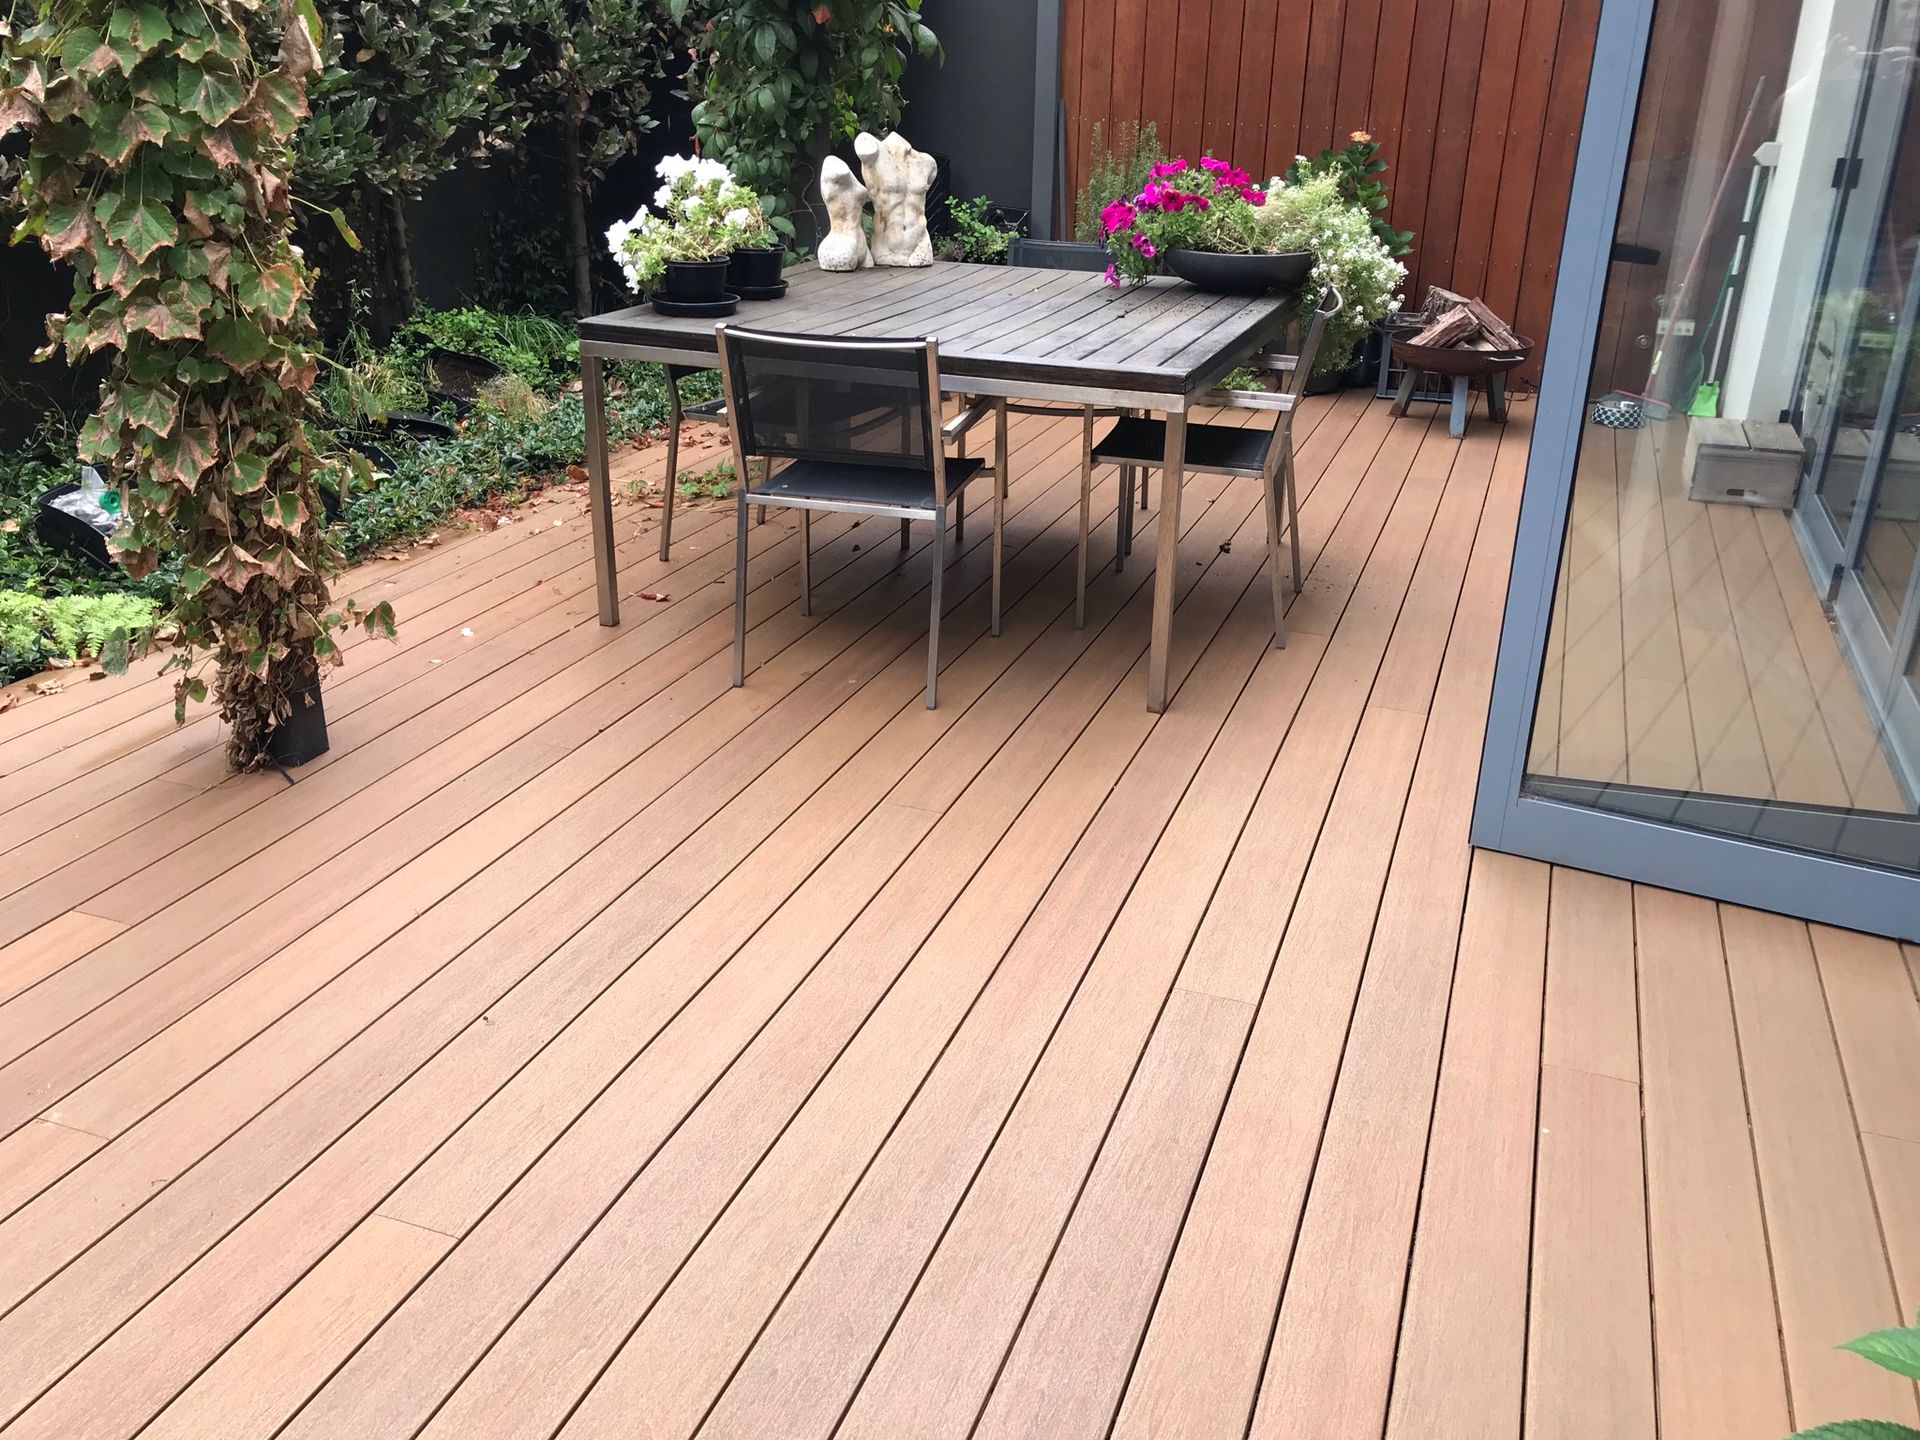 Decking with plants